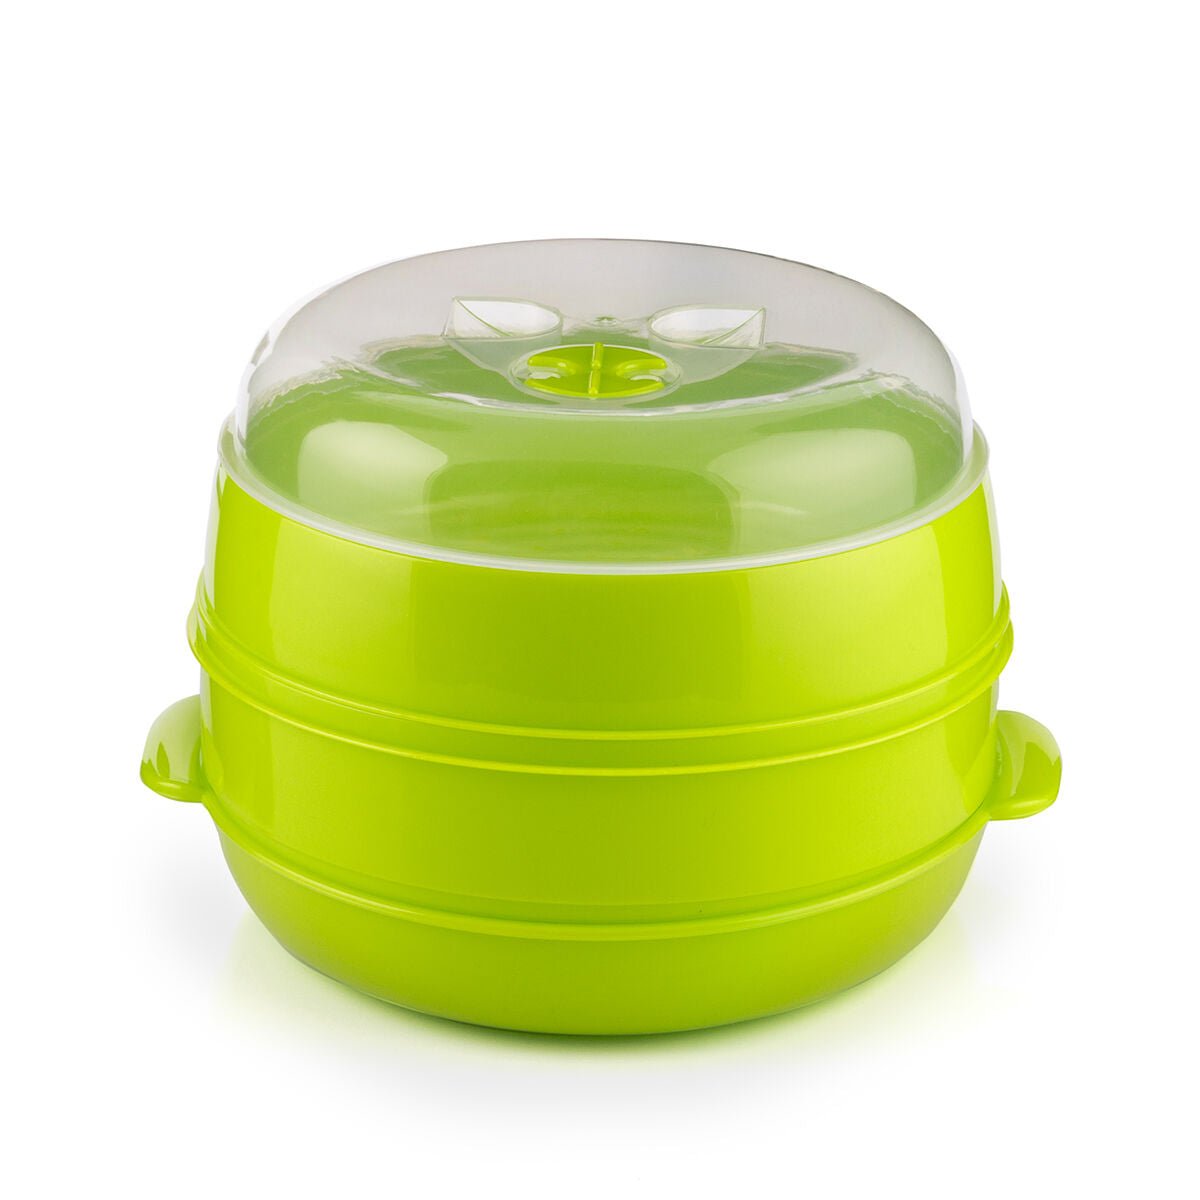 Microwave double vegetable steamer